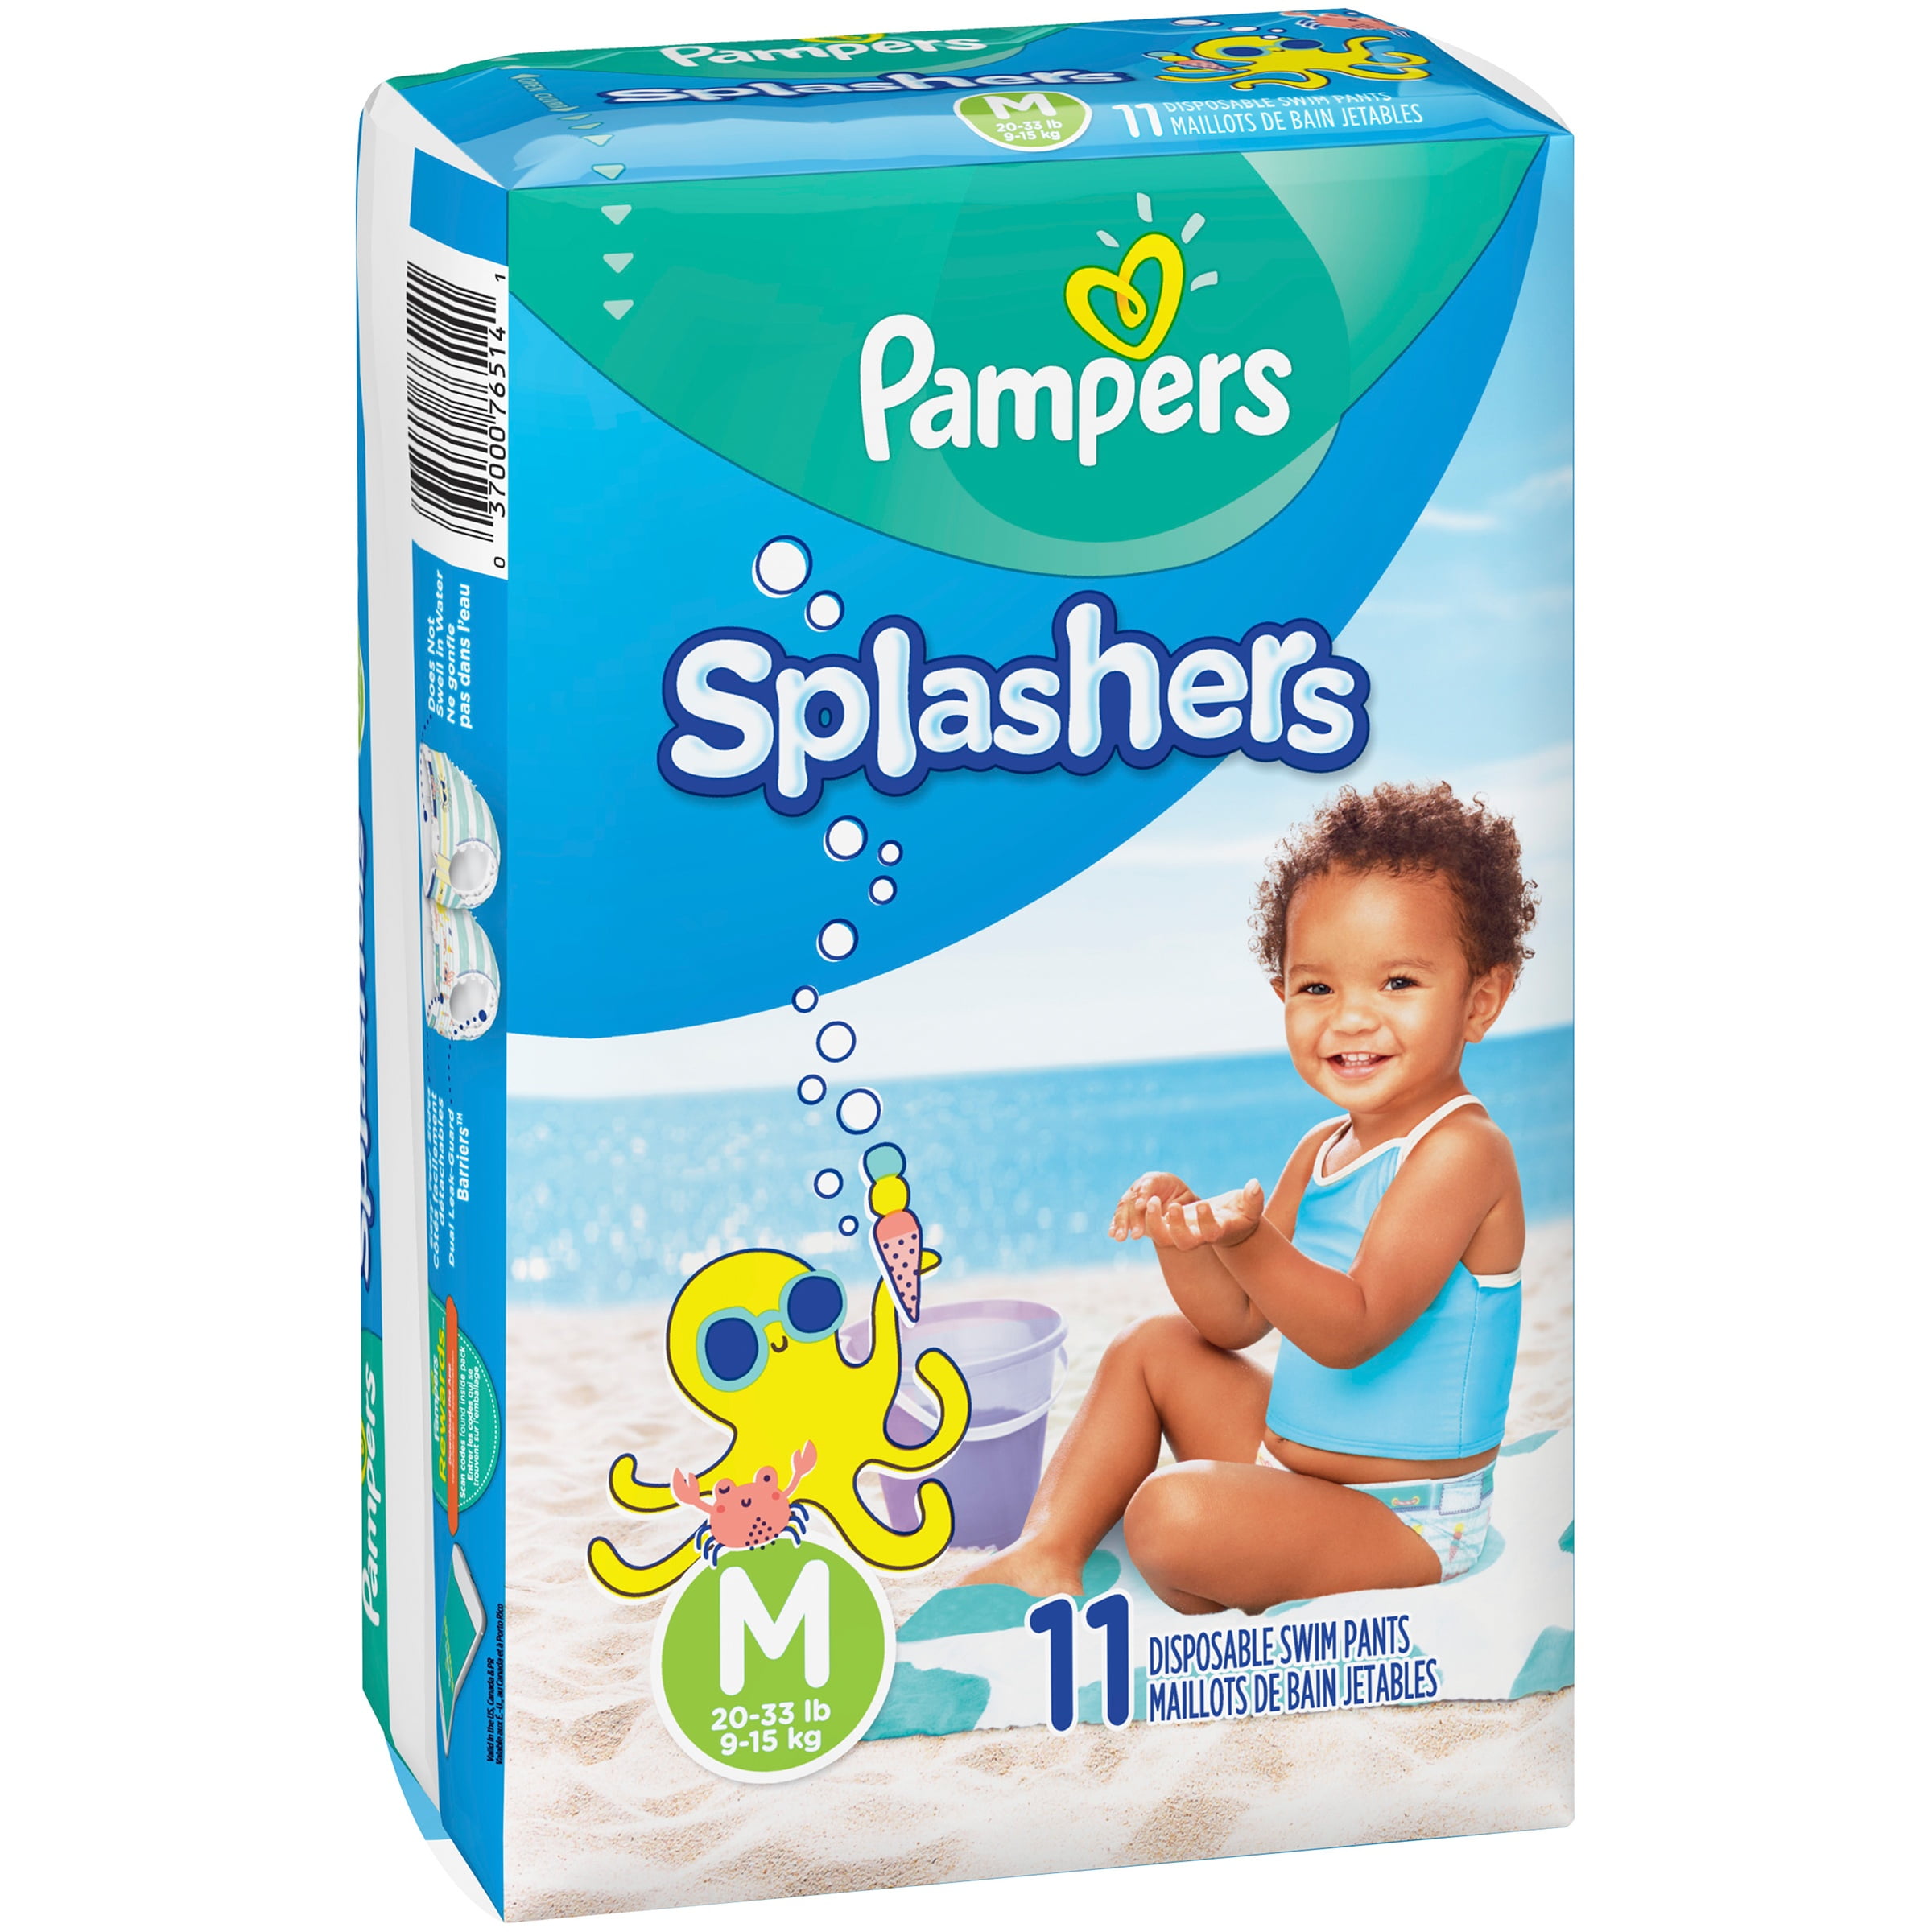 Pampers Splashers Swim Pants 2 Pk Small S Disposable Swimmer Diapers 20 Per Pack 